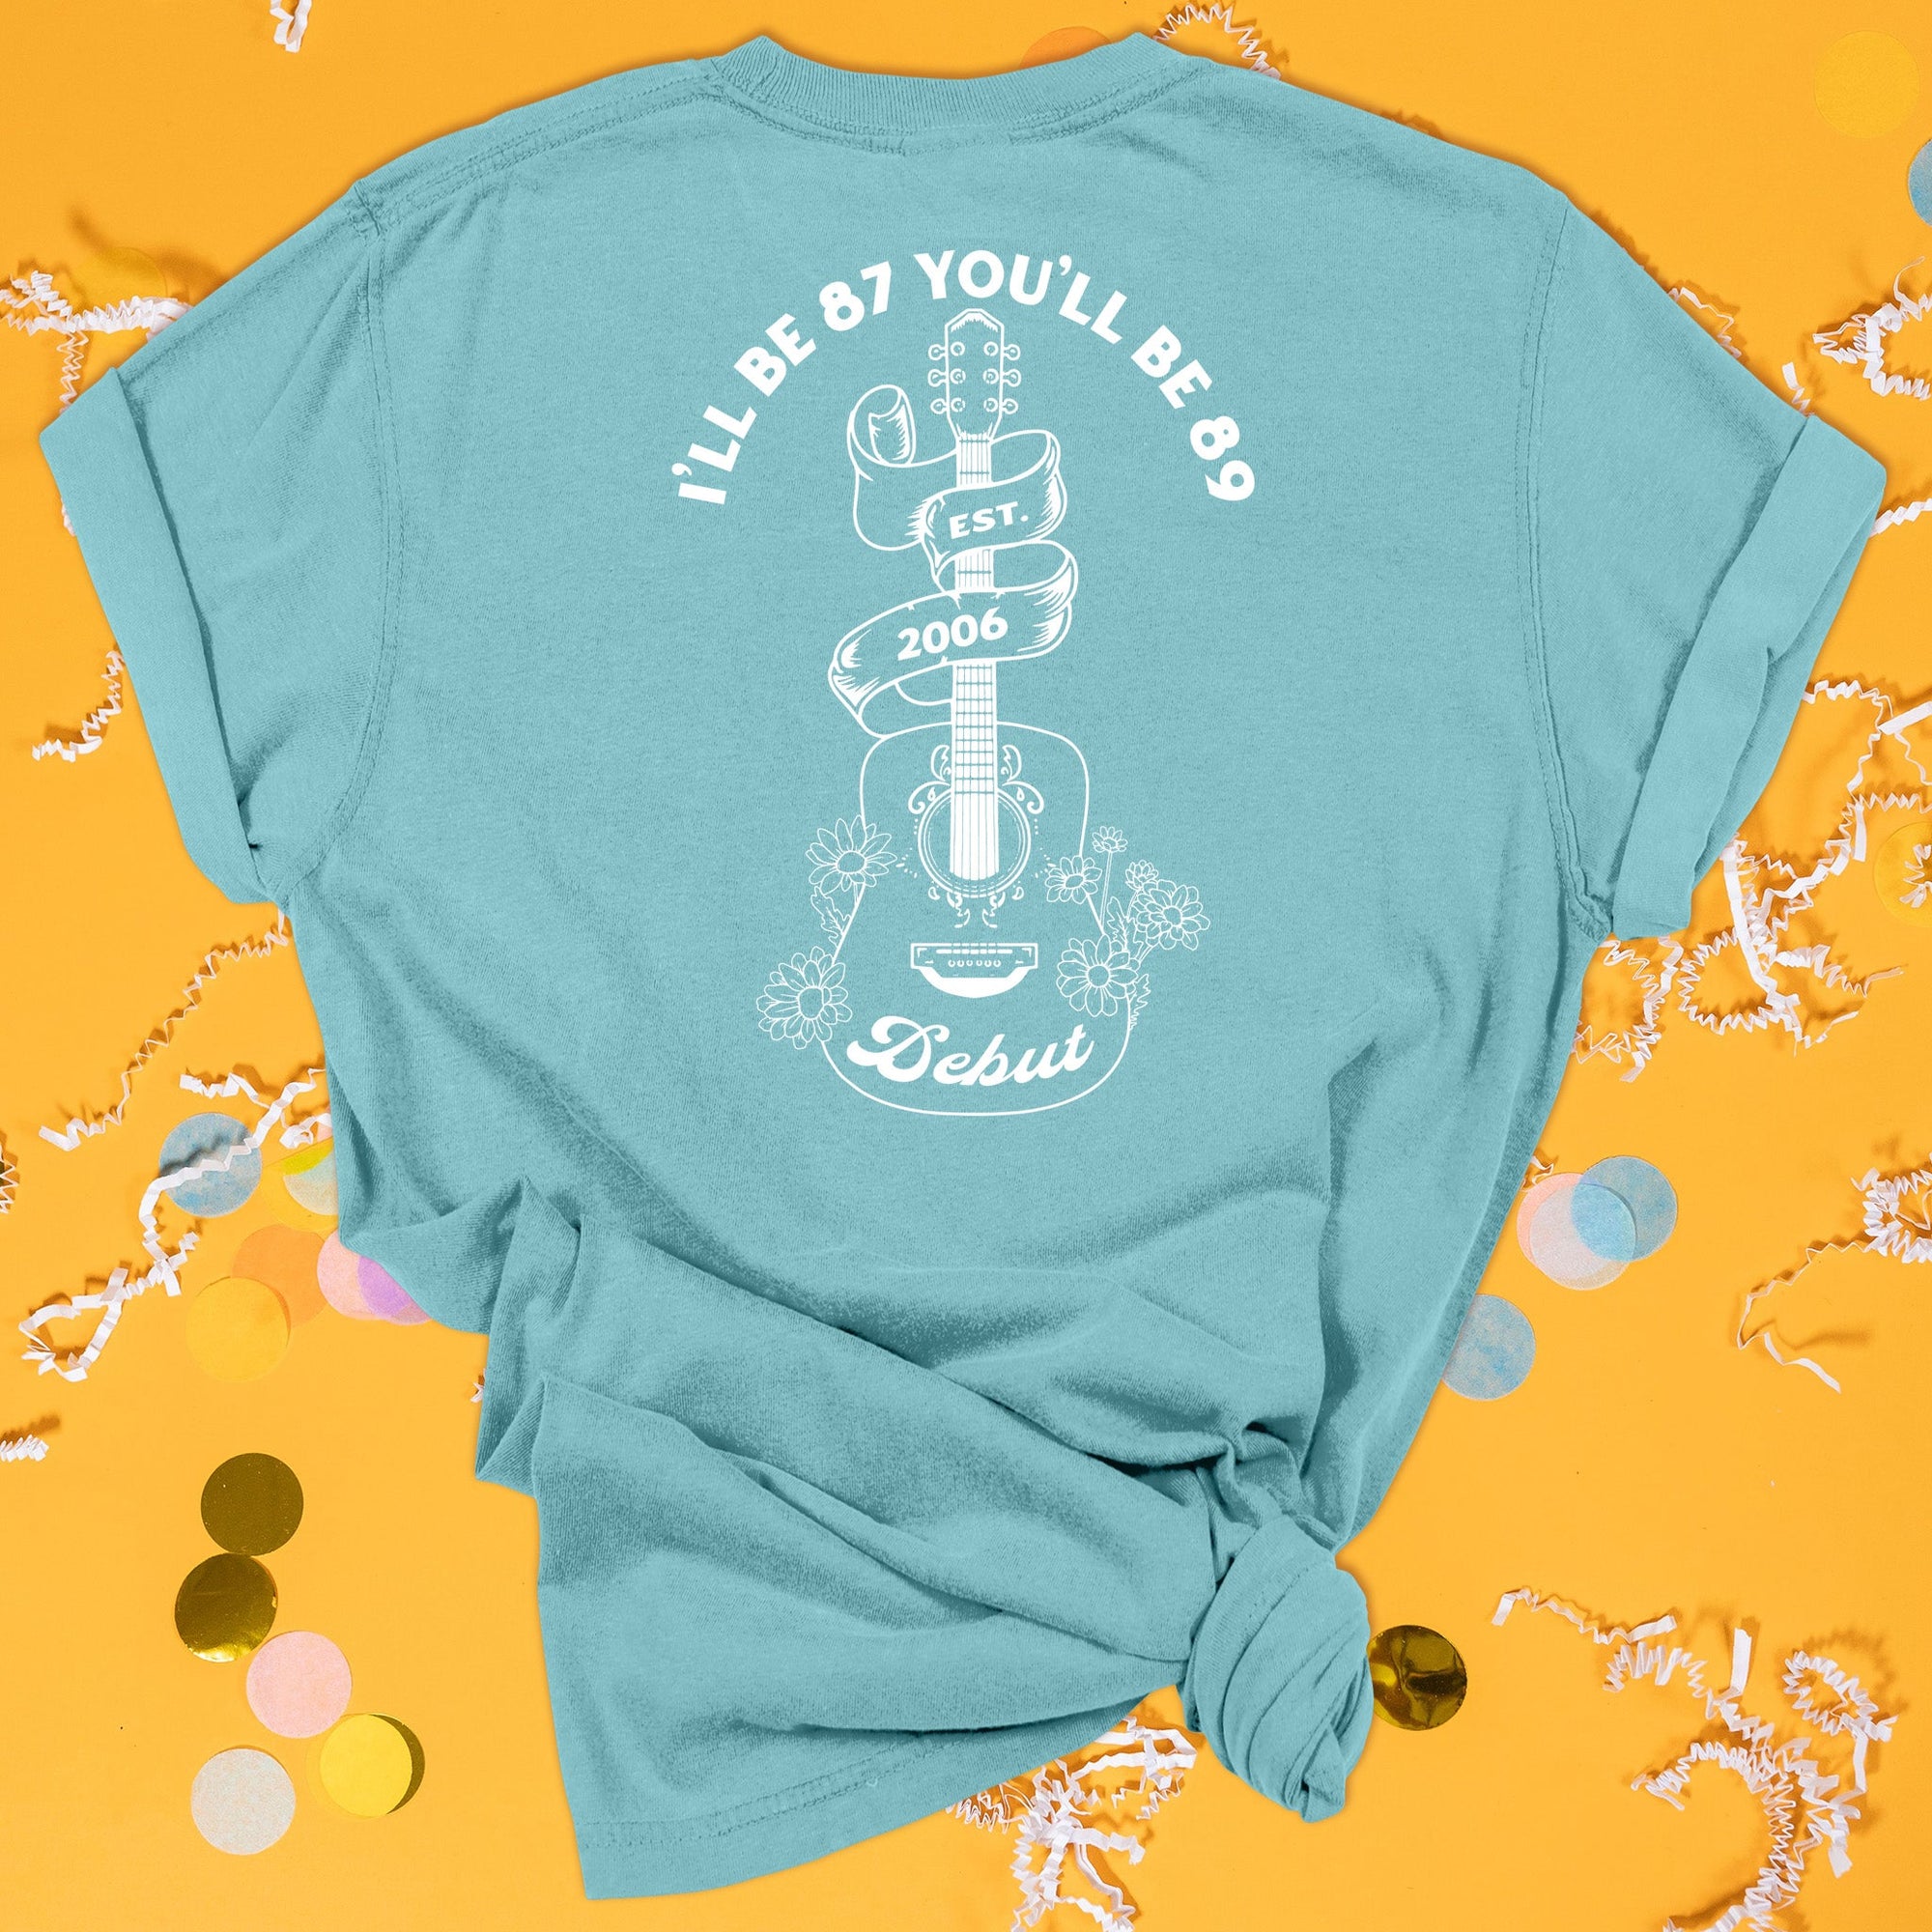 On a sunny mustard background sits the back of a t-shirt with white crinkle and big, colorful confetti scattered around. This Taylor Swift Inspired Reputation tee is aqua with white lettering and illustration. There is a guitar with flowers and a ribbon wrapped around the top of it. It says "I'LL BE 87 YOU'LL BE 89" at the top. In the ribbon it says "EST. 2006" and on the bottom of the guitar it says "Debut."